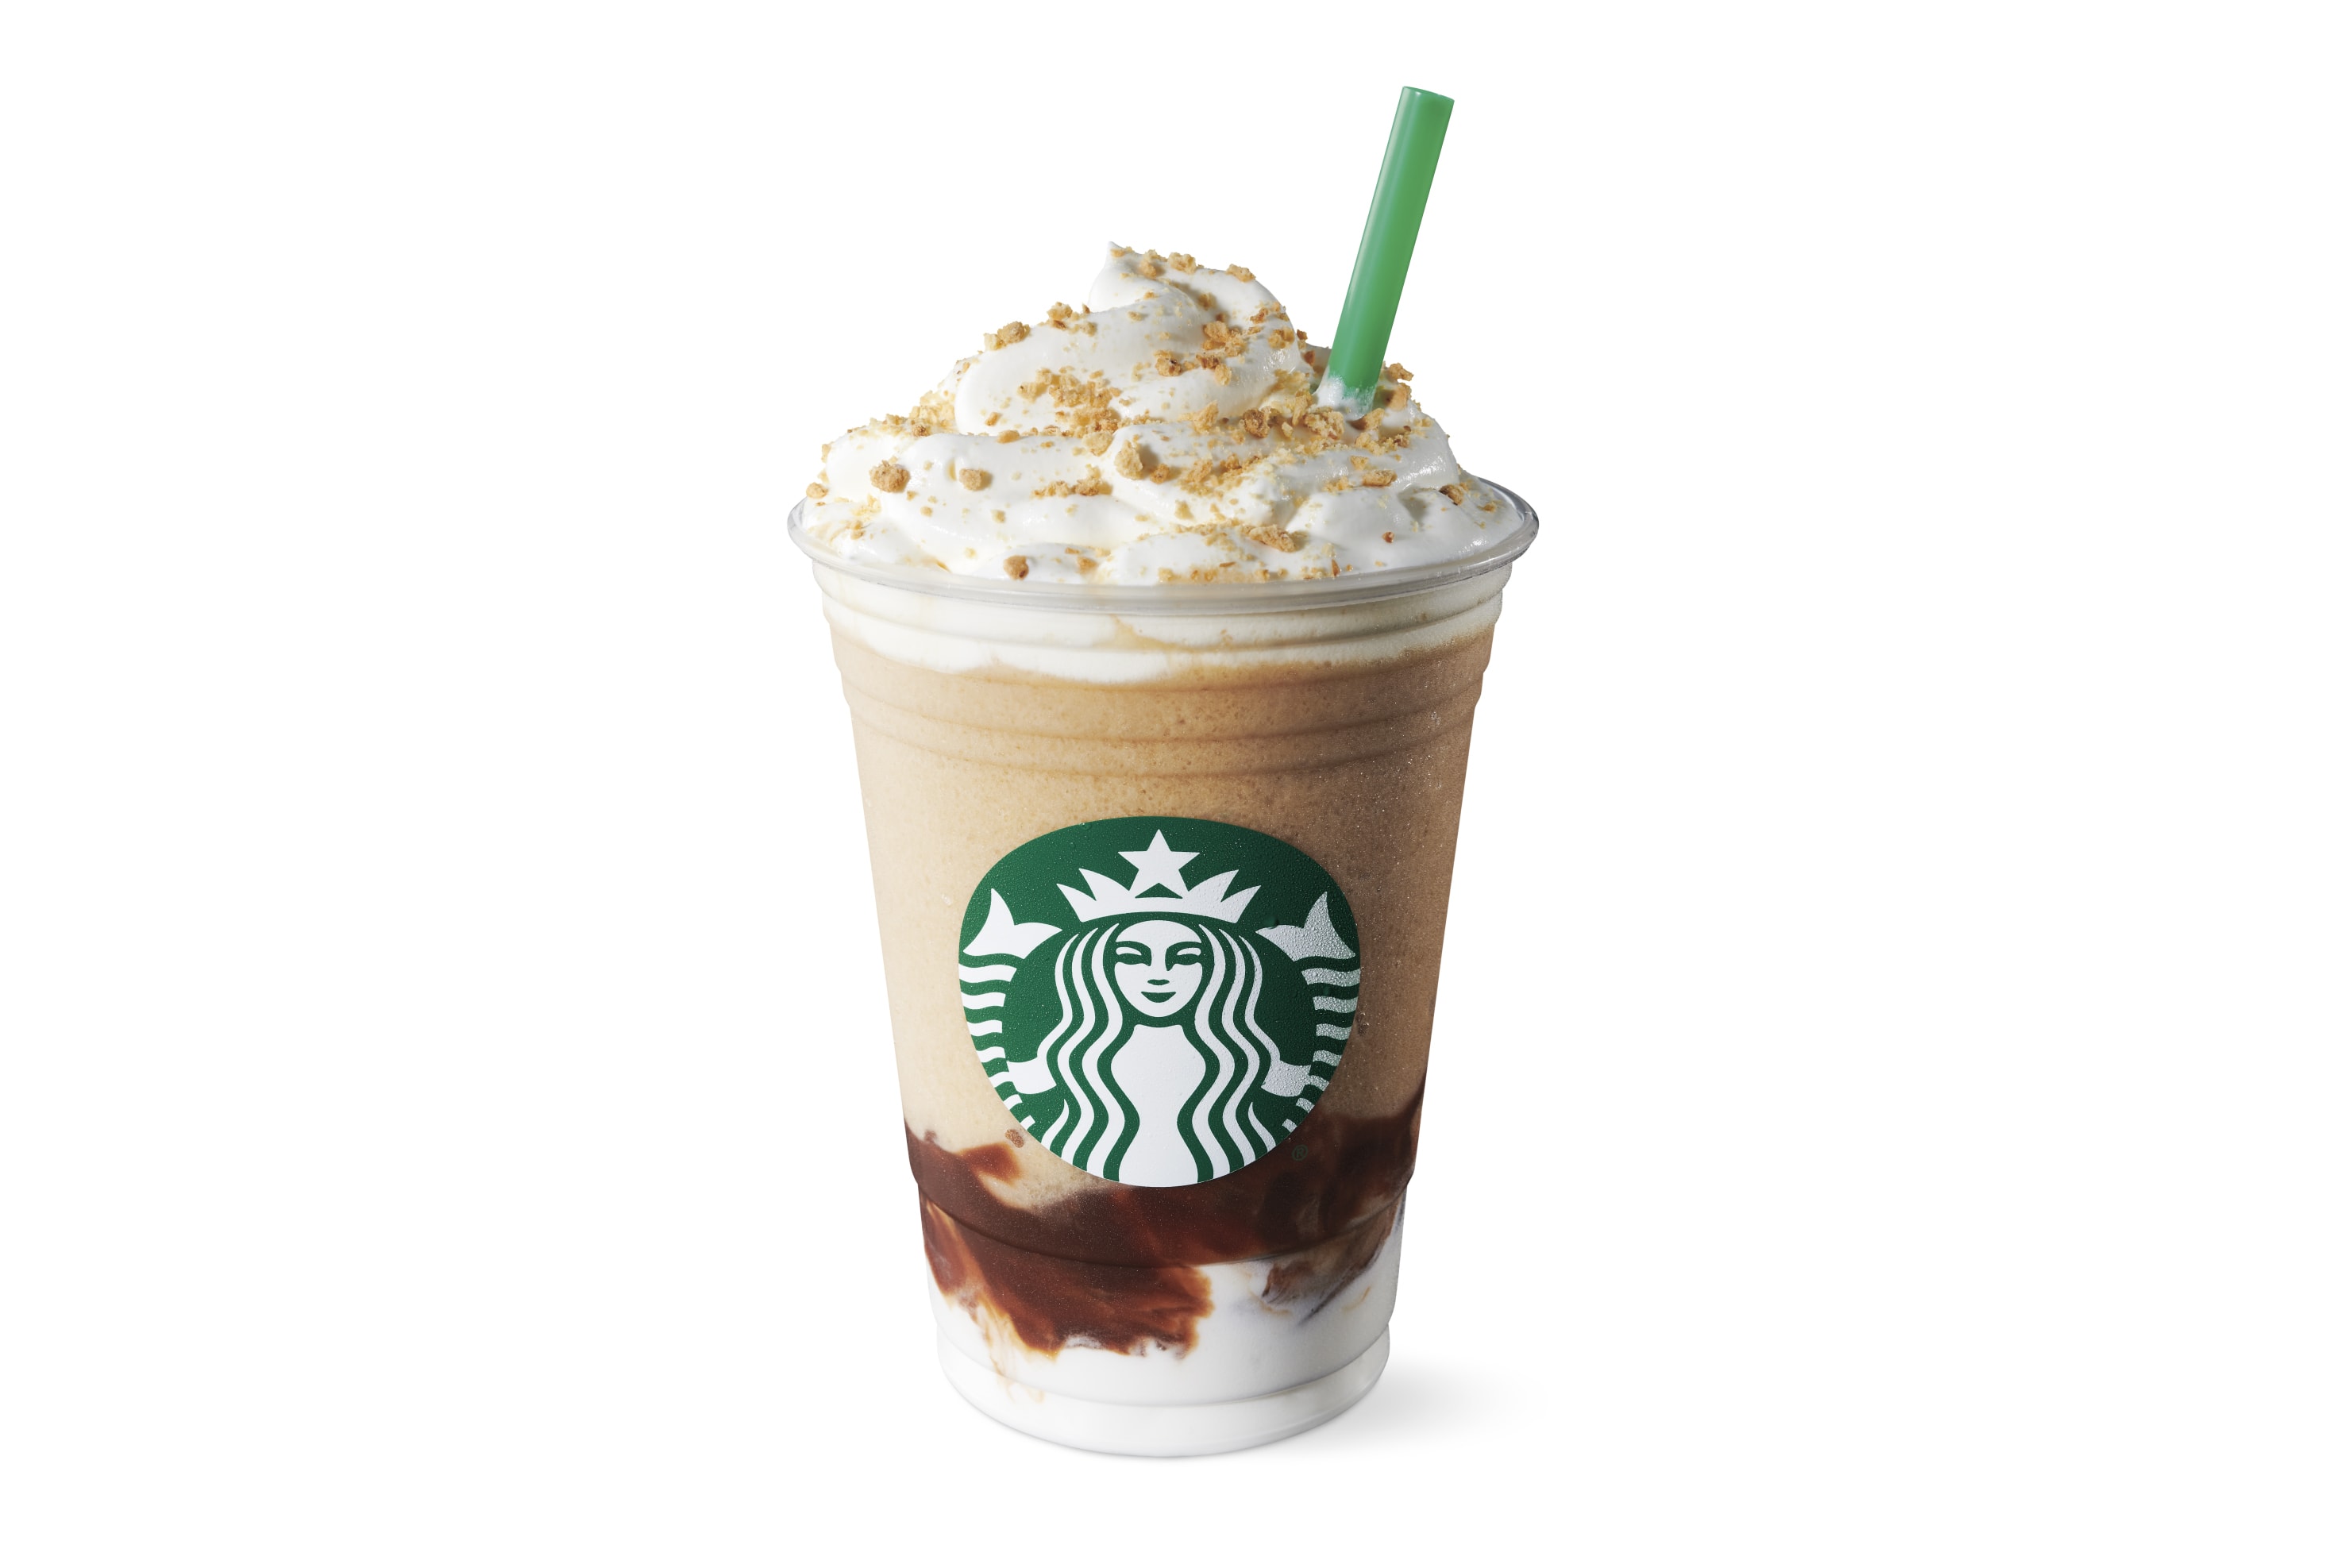 Starbucks S'mores Frappuccino Summer Drink Release Chocolate Marshmallow Graham Crackers Sweet 